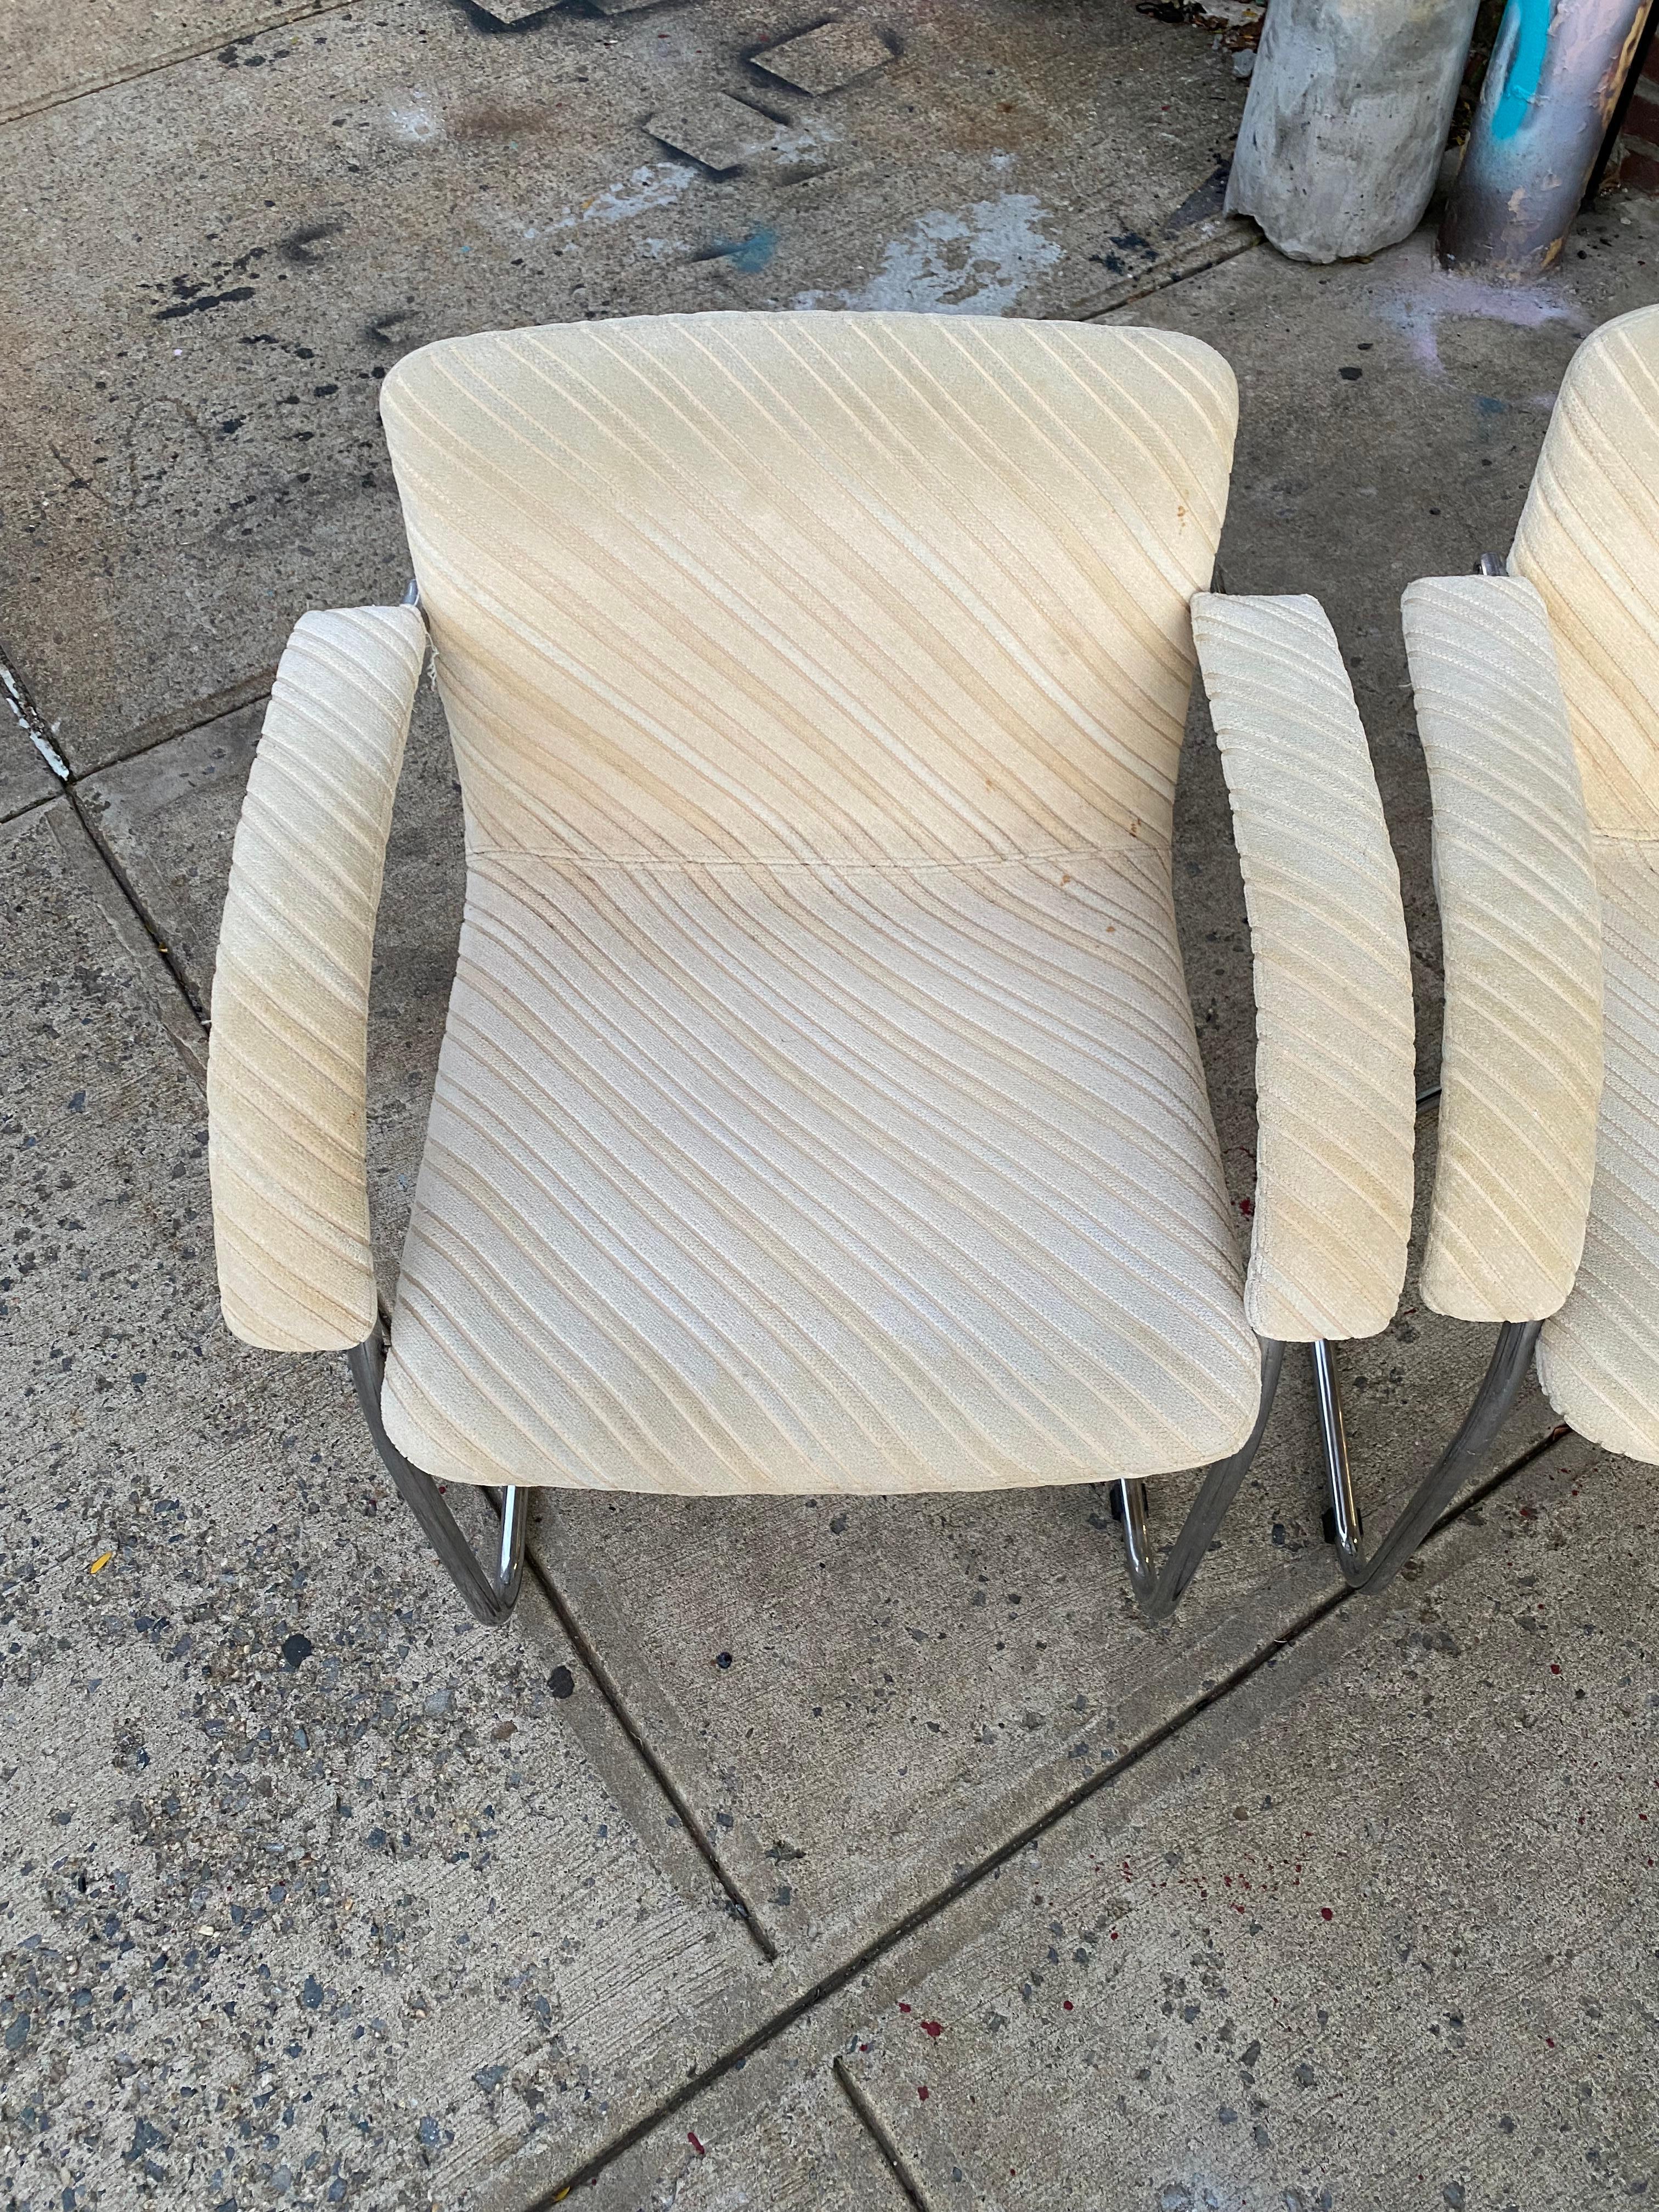 Beautiful lines on this set of four dining chairs by Gino Sarfatti for Saporiti Italia. Structurally sound with all parts intact. Could also be professionally steam cleaned and used as is. Great candidate for reupholstery in textile of your